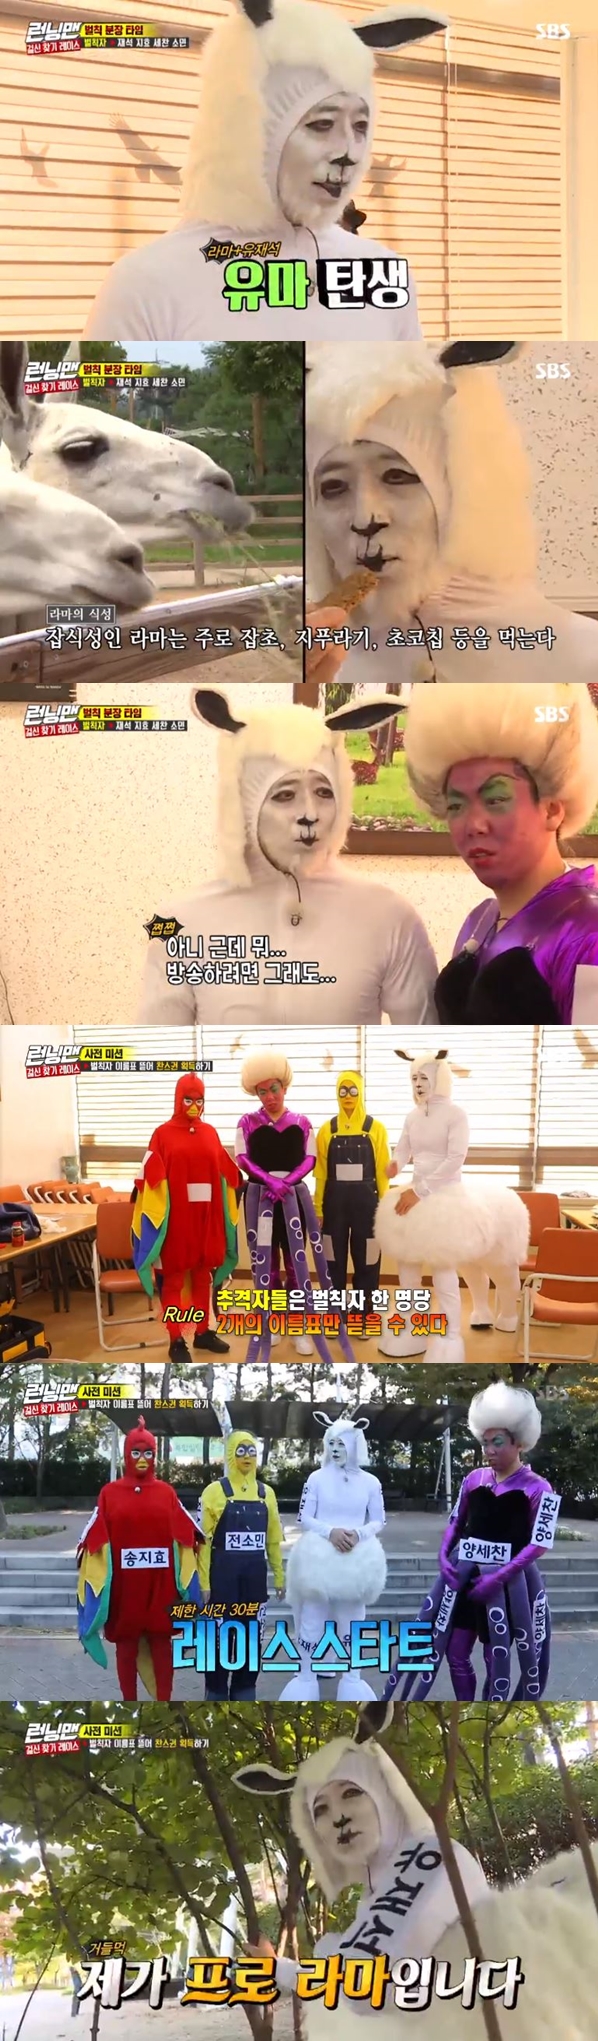 Shocking visuals of Yoo Jae-Suk made up by Lamar Jackson have been revealed.On the 3rd, SBS entertainment program Running Man depicted the make-up of Yoo Jae-Suk, Song Ji-hyo, Jeon So-min, and Yang Se-chan who won the make-up penalty.Yang Se-chan and Jeon So-min, who arrived earlier than usual, were stunned to see the colorful costumes - a costume for a penalty make-up that turned out to be.Jeon So-min was to wear Minions costumes while Yang Se-chan was to wear the mermaids octopus witch Usla costume; Jeon So-min said: I promise.I will delete all these videos when I get married. Song Ji-hyo, who arrived following, was Angry Bird, and Yoo Jae-Suk was Lamar Jackson made up.Yoo Jae-Suk made up with Lamar Jackson; members couldnt hide their laughter on the shocking make-up visuals of Yoo Jae-Suk.On the other hand, Running Man is an entertainment program where South Koreas top entertainers gather at landmarks representing South Korea to solve missions everywhere.It airs every Sunday at 5 p.m.